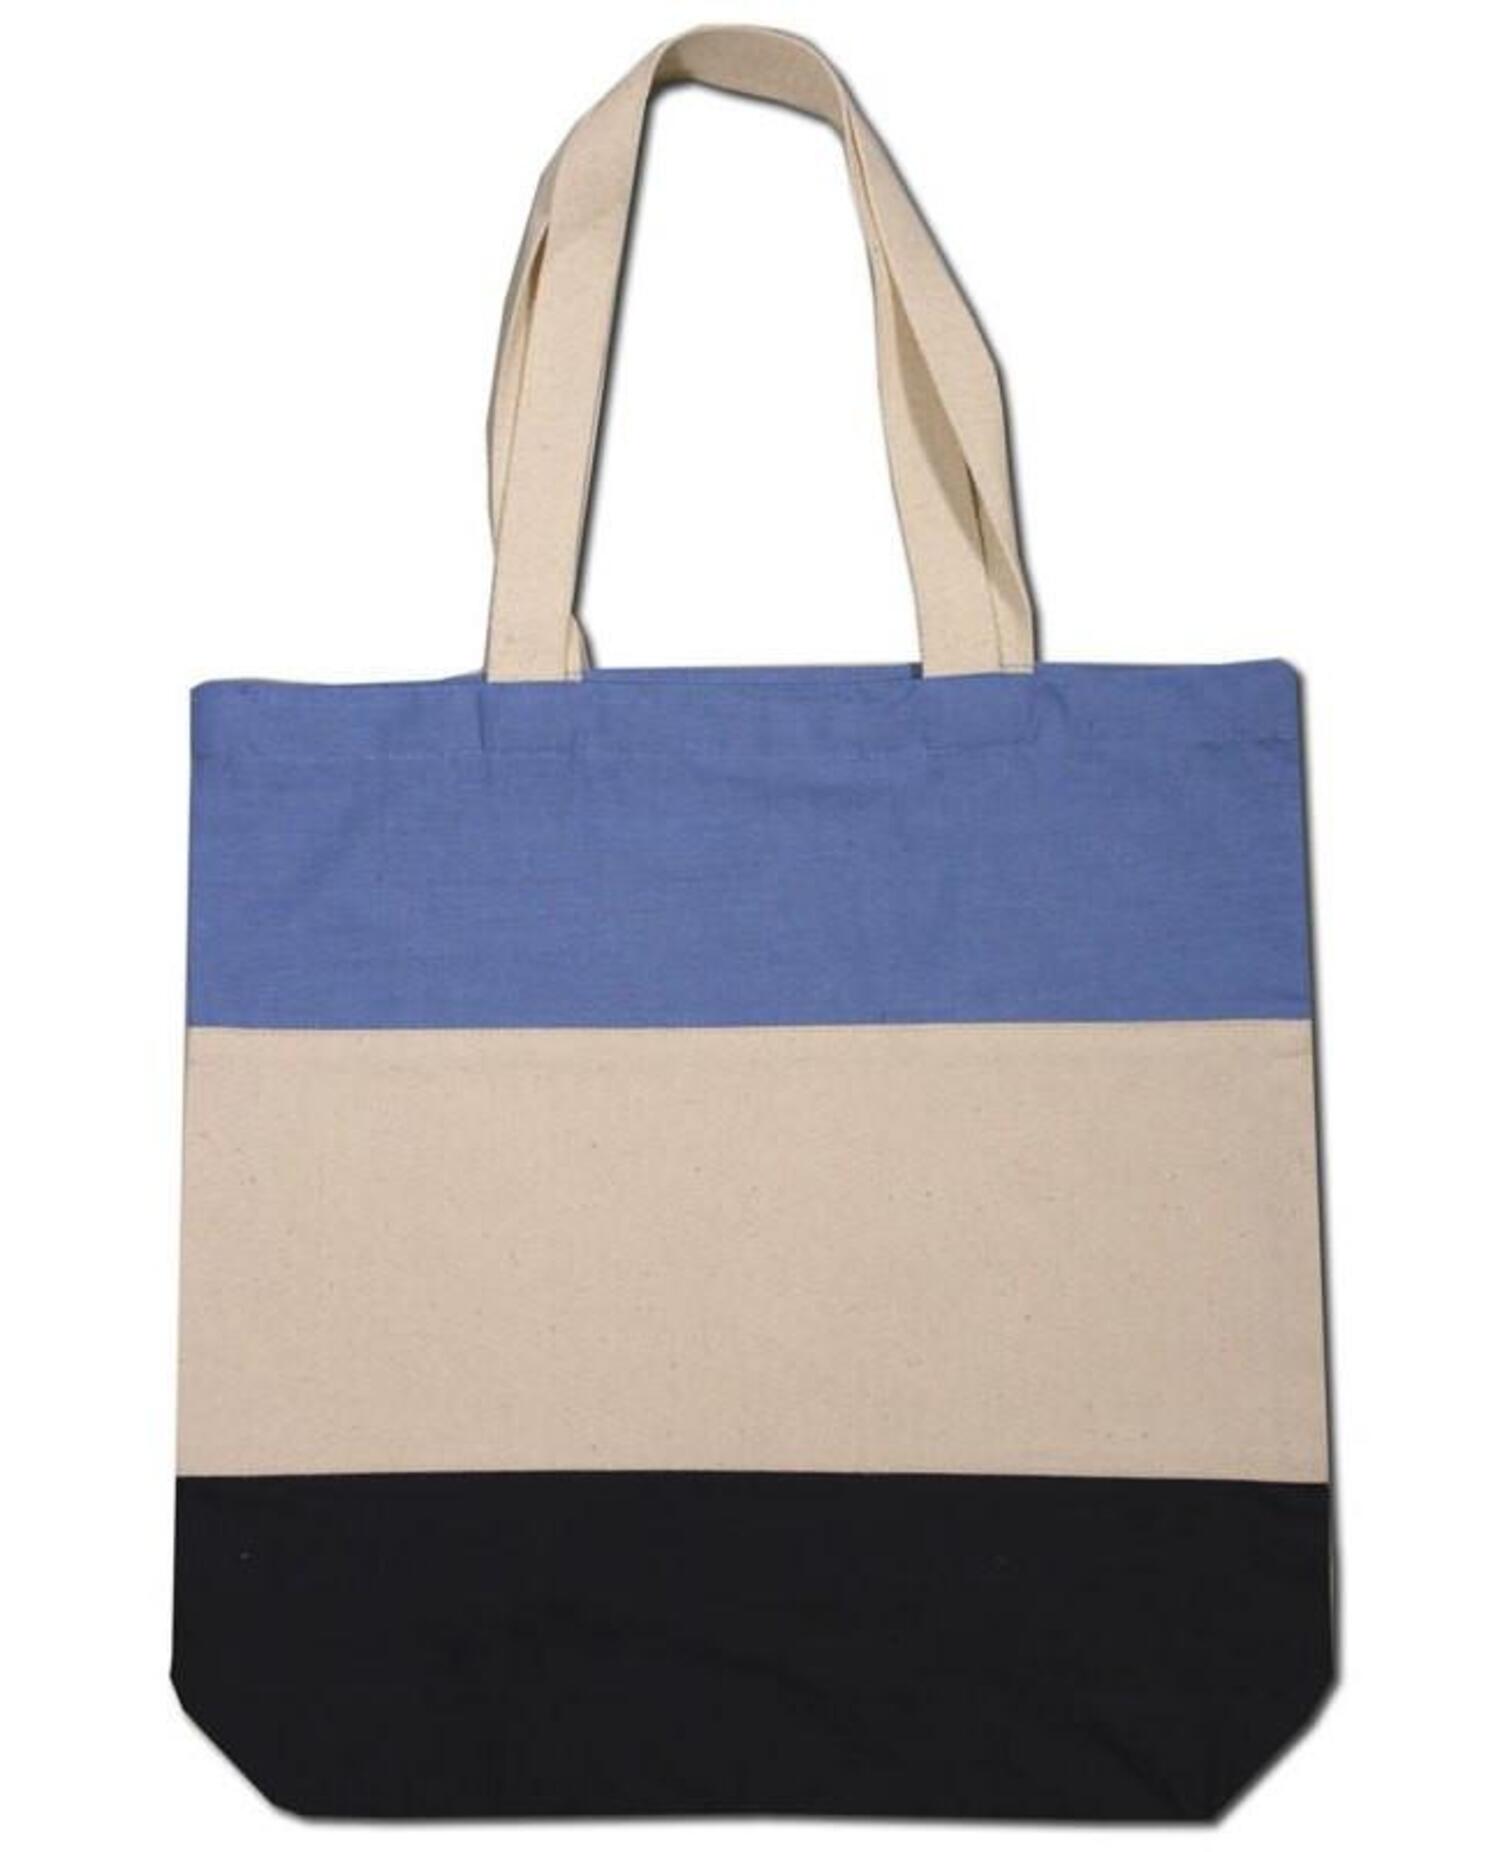 10 Tote Bags That Tour Friends Will Envy You | ToteBagFactory